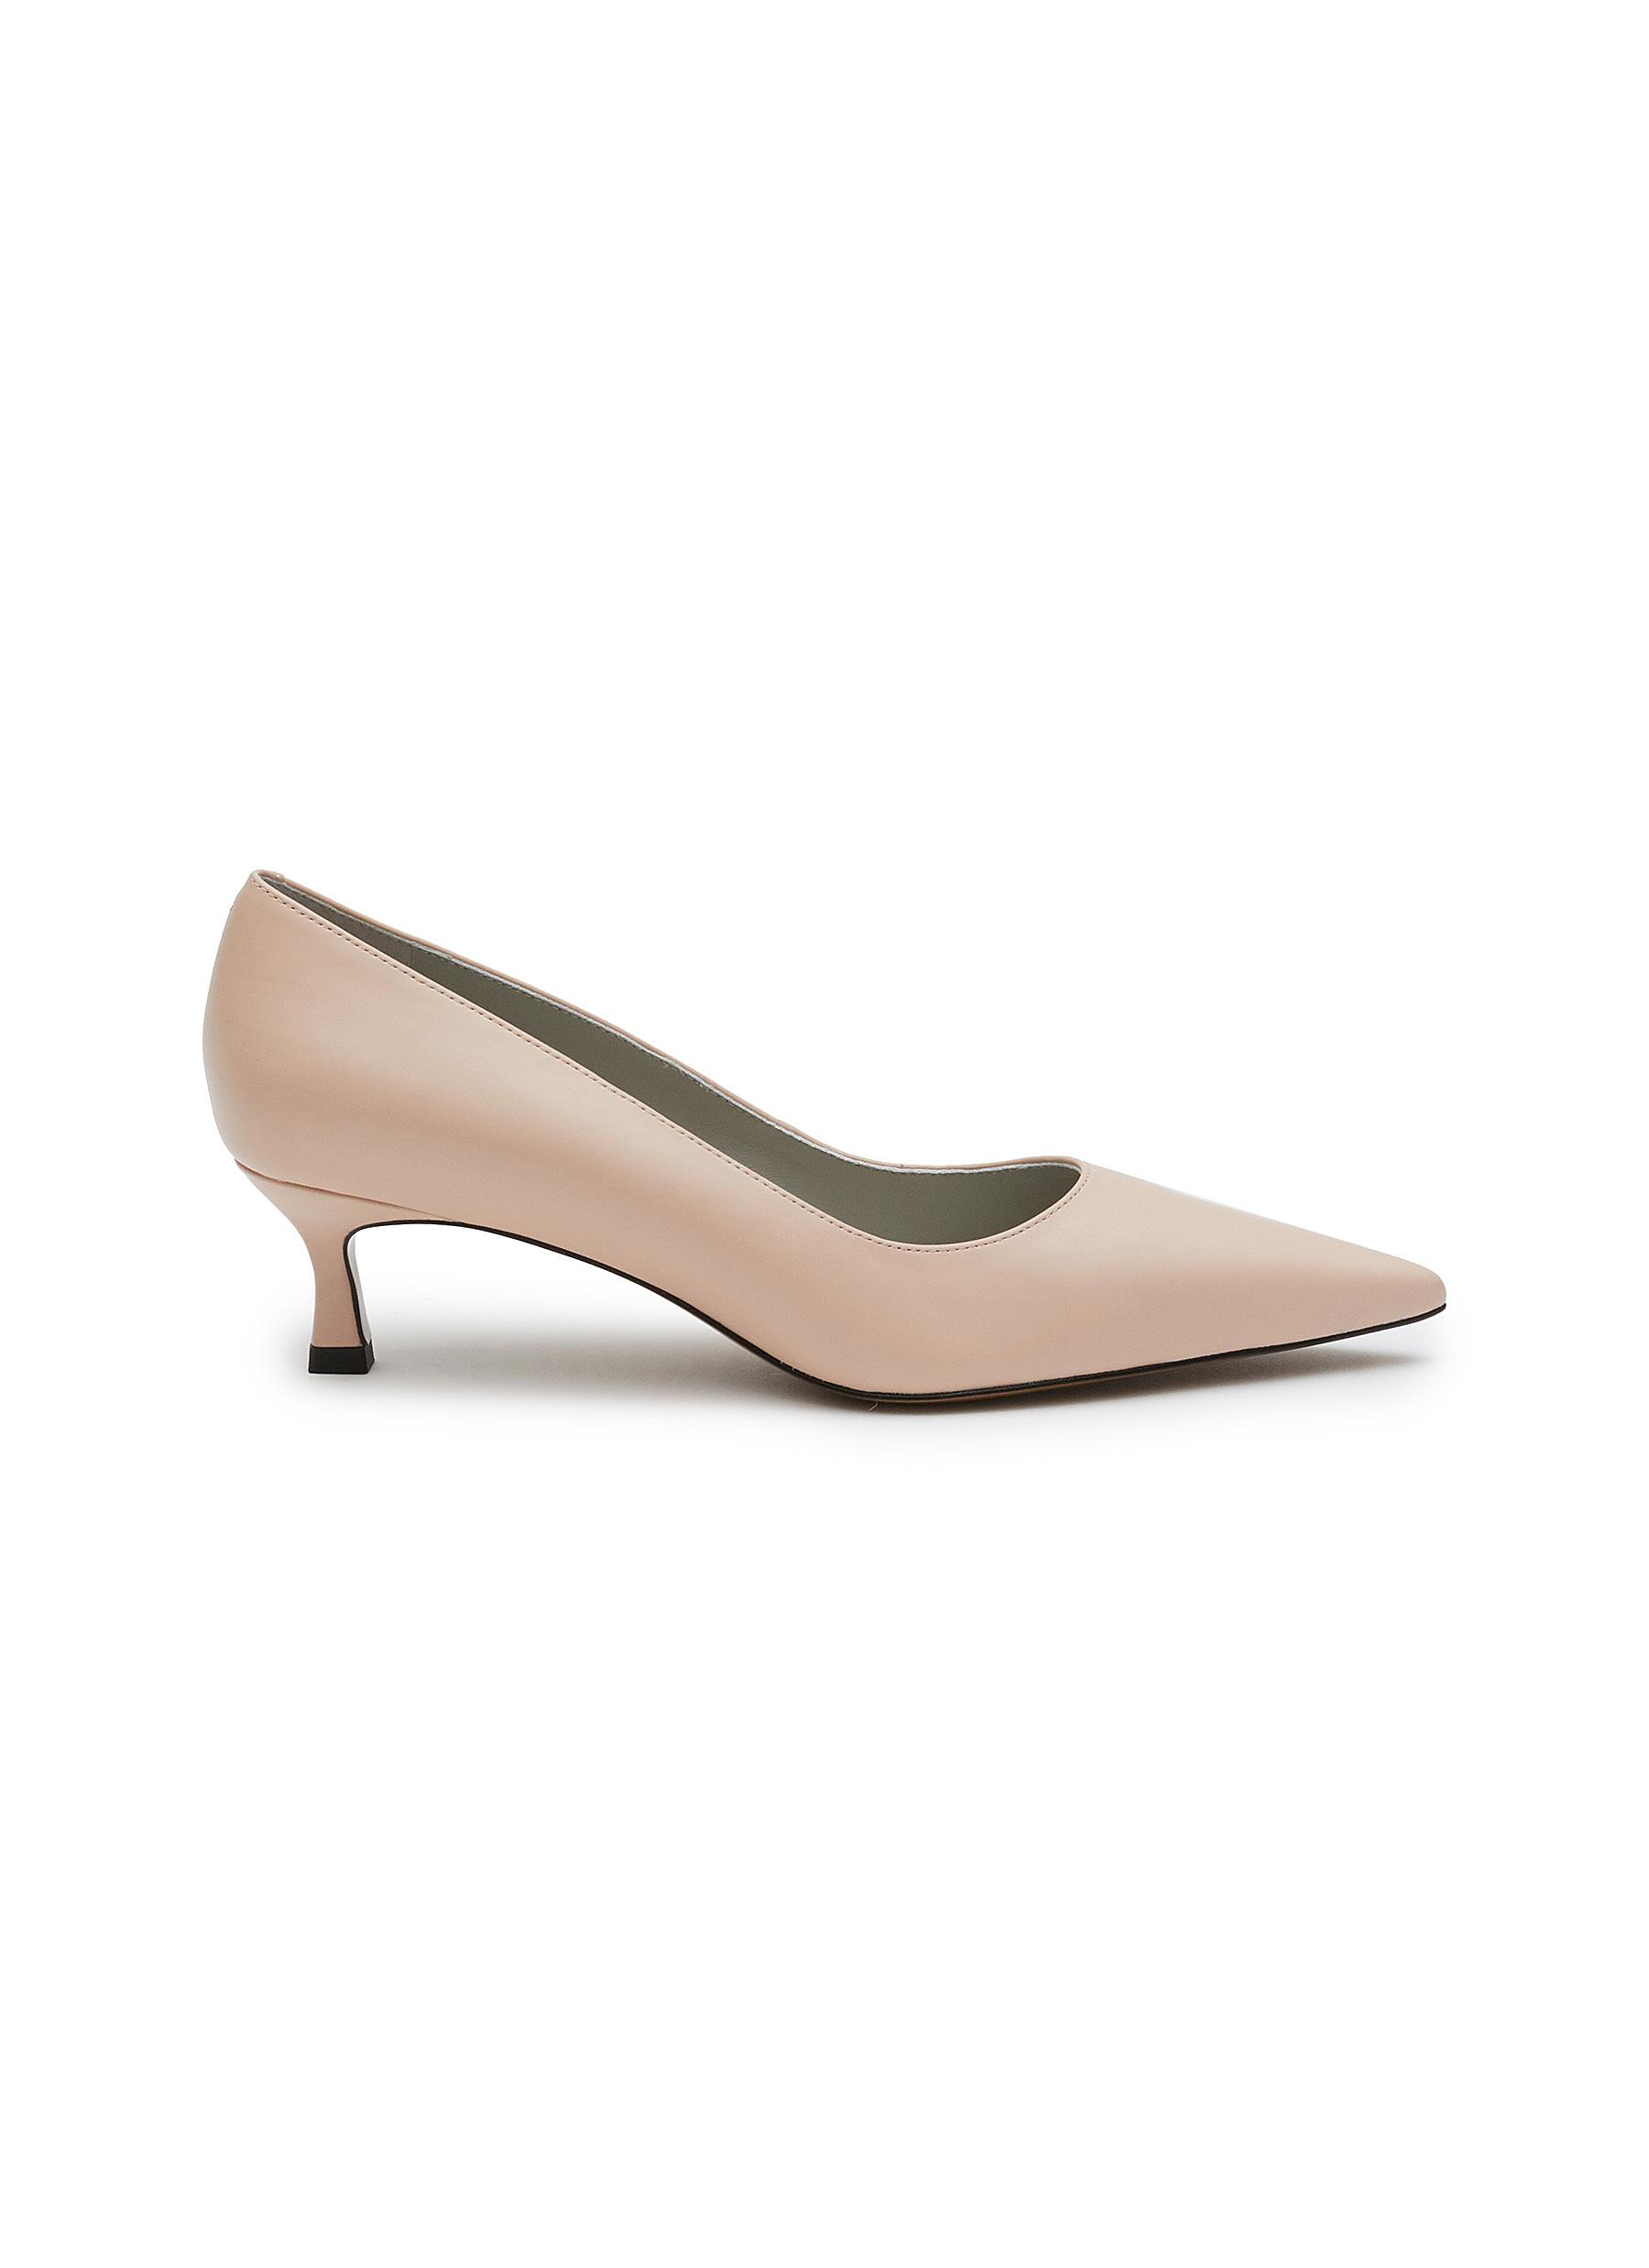 EQUIL ‘ROMA' POINT TOE LEATHER PUMPS